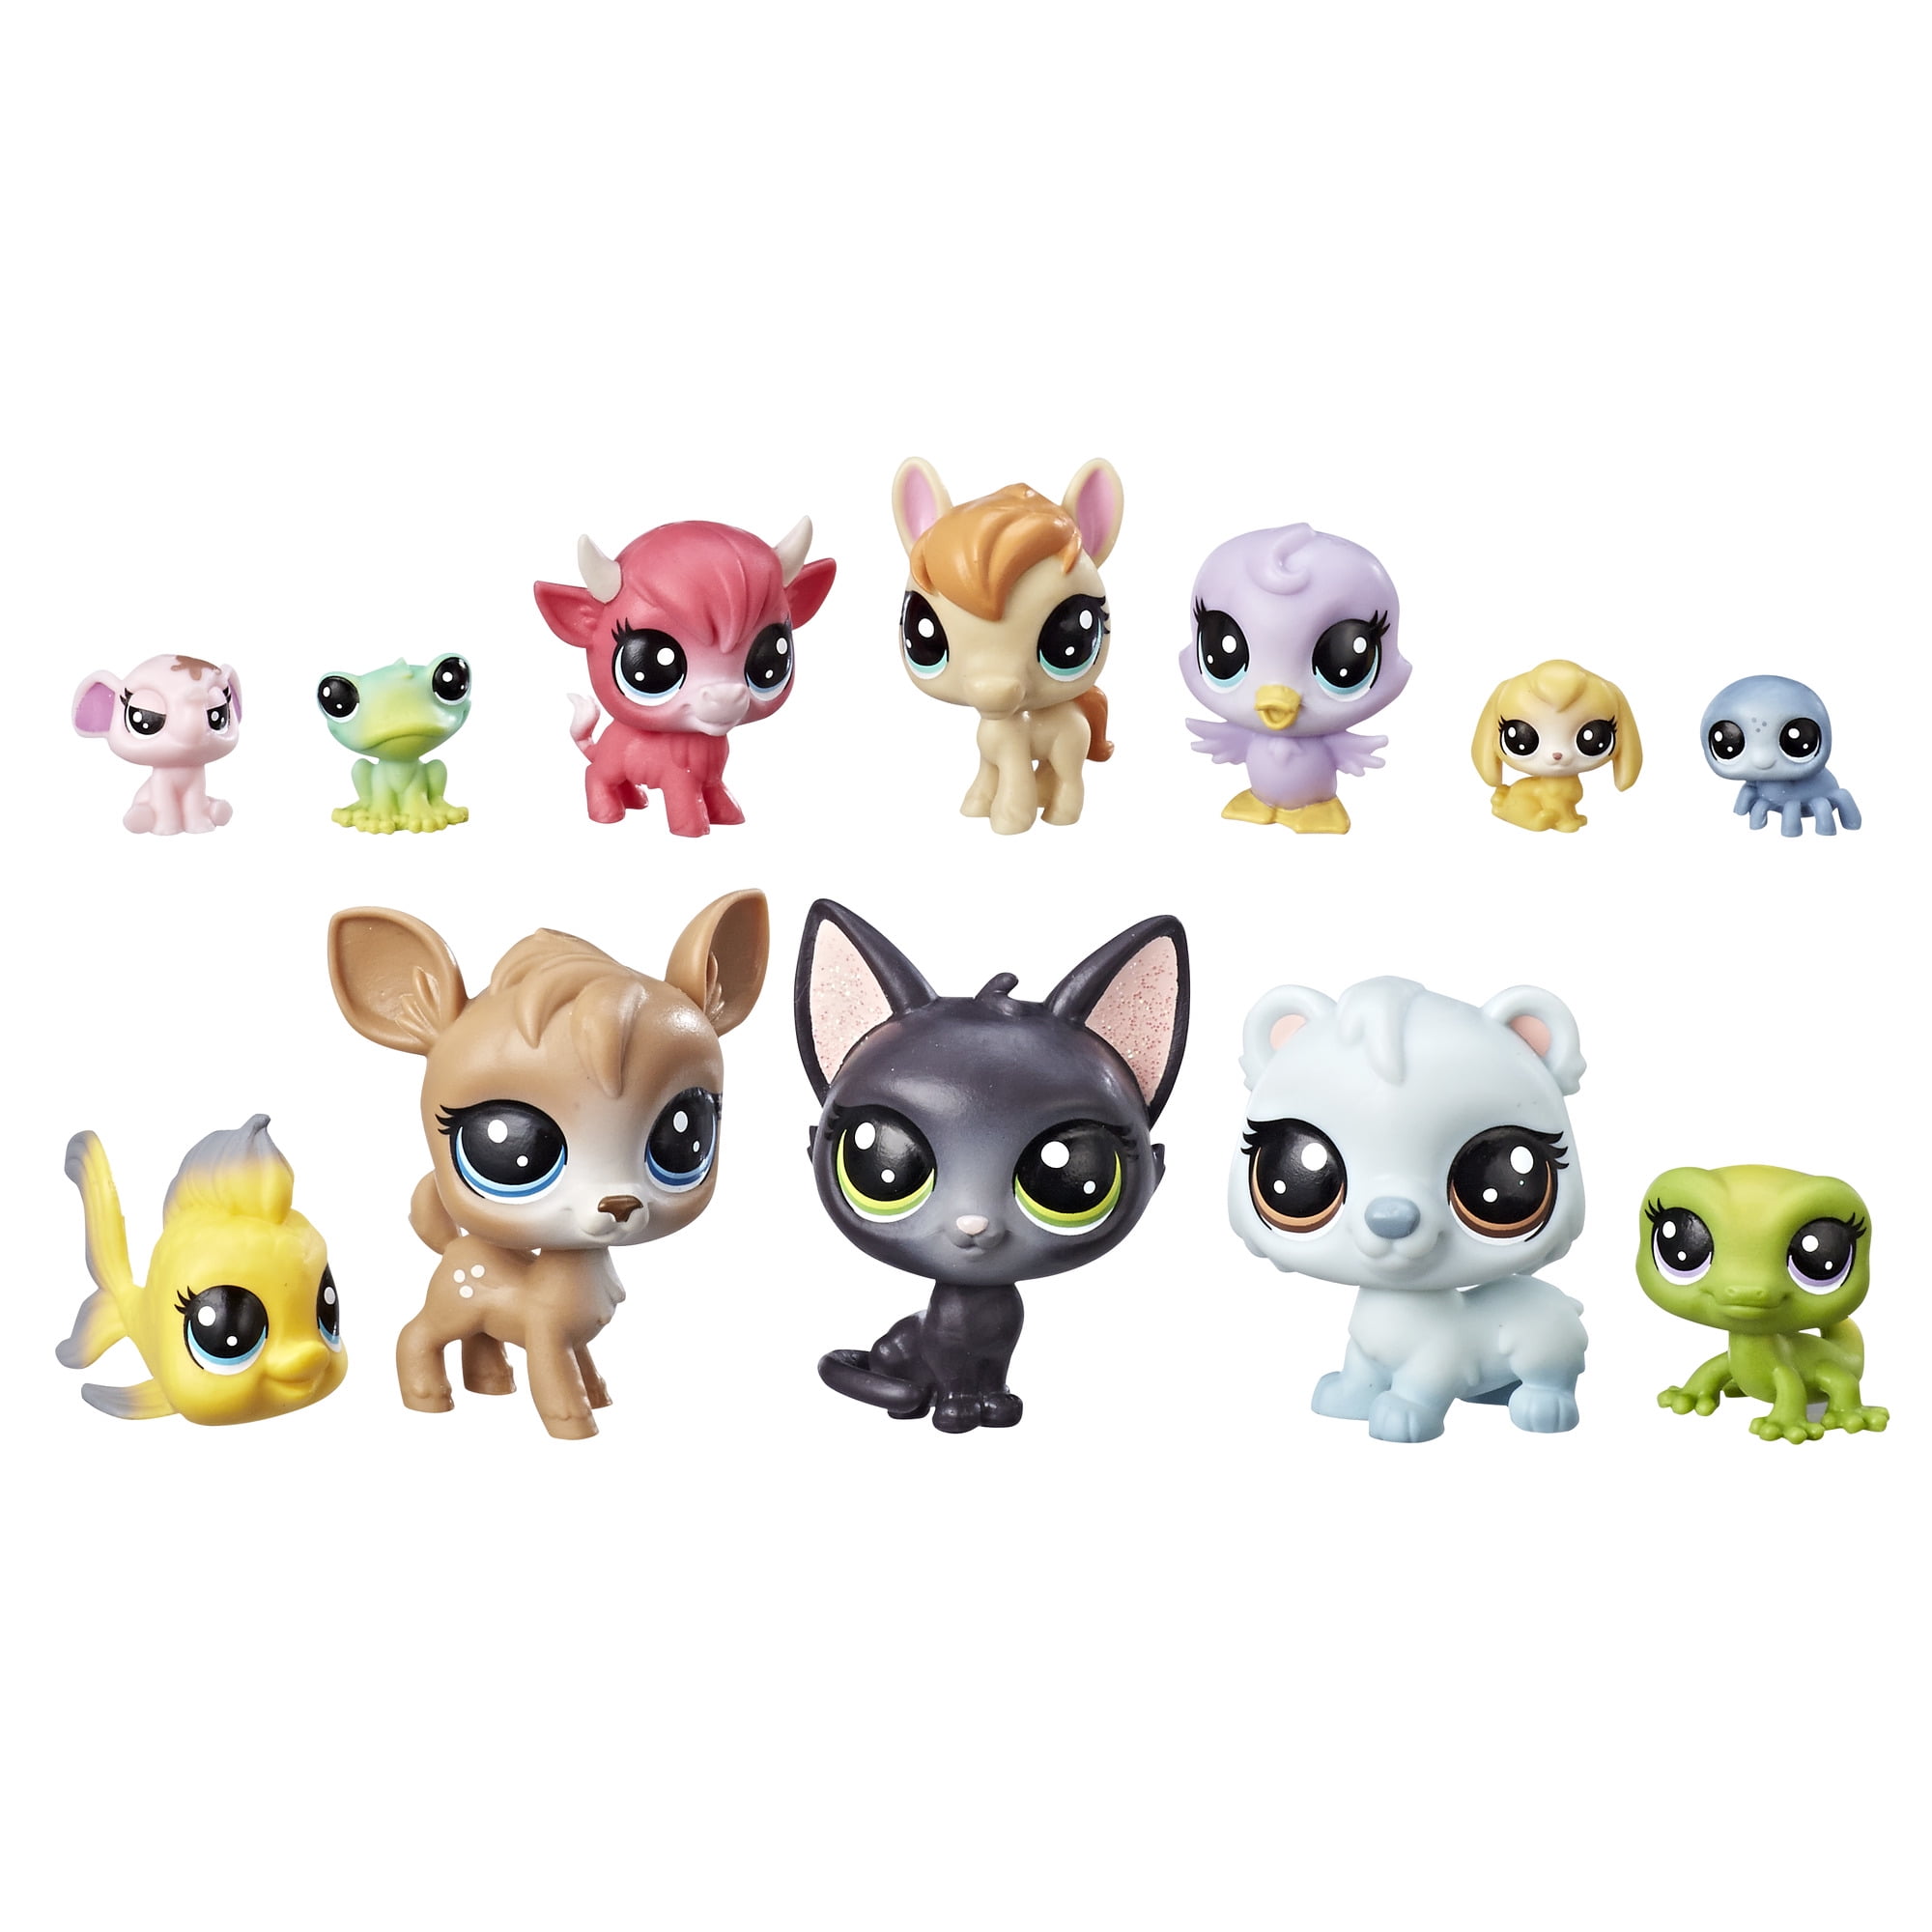 8 LITTLEST PET SHOP FASHEMS SERIES 4 LOT OF BLIND CAPSULES SHIPS FAST NEW  HOT 